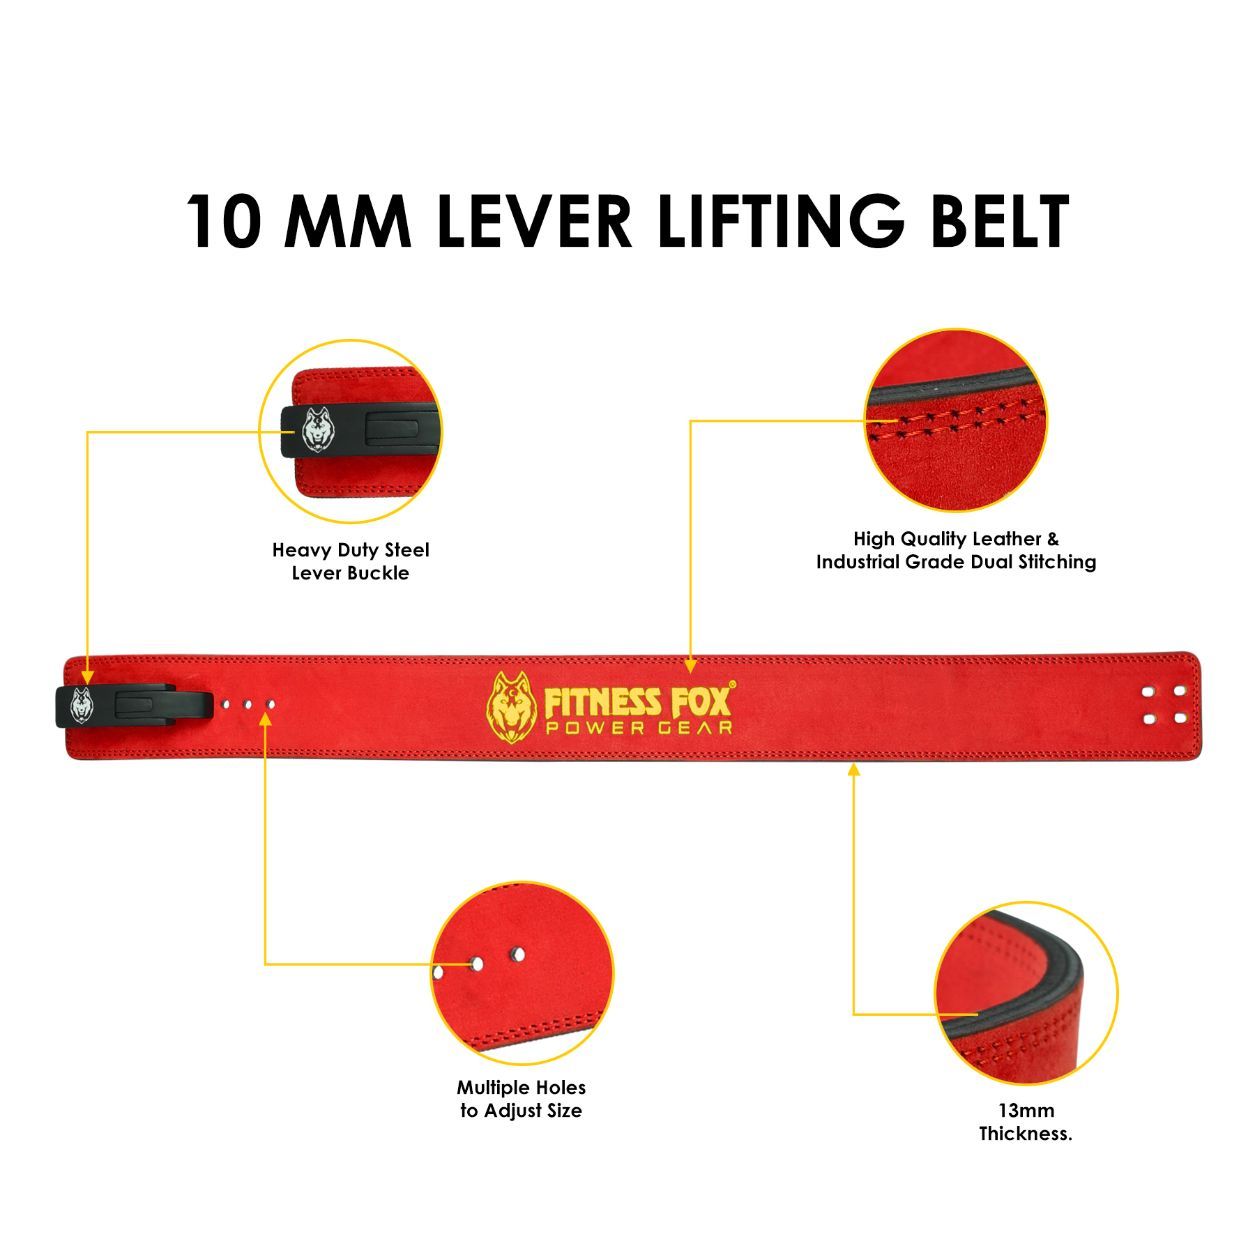 FITNESS FOX 13MM Weightlifting Lever Belt